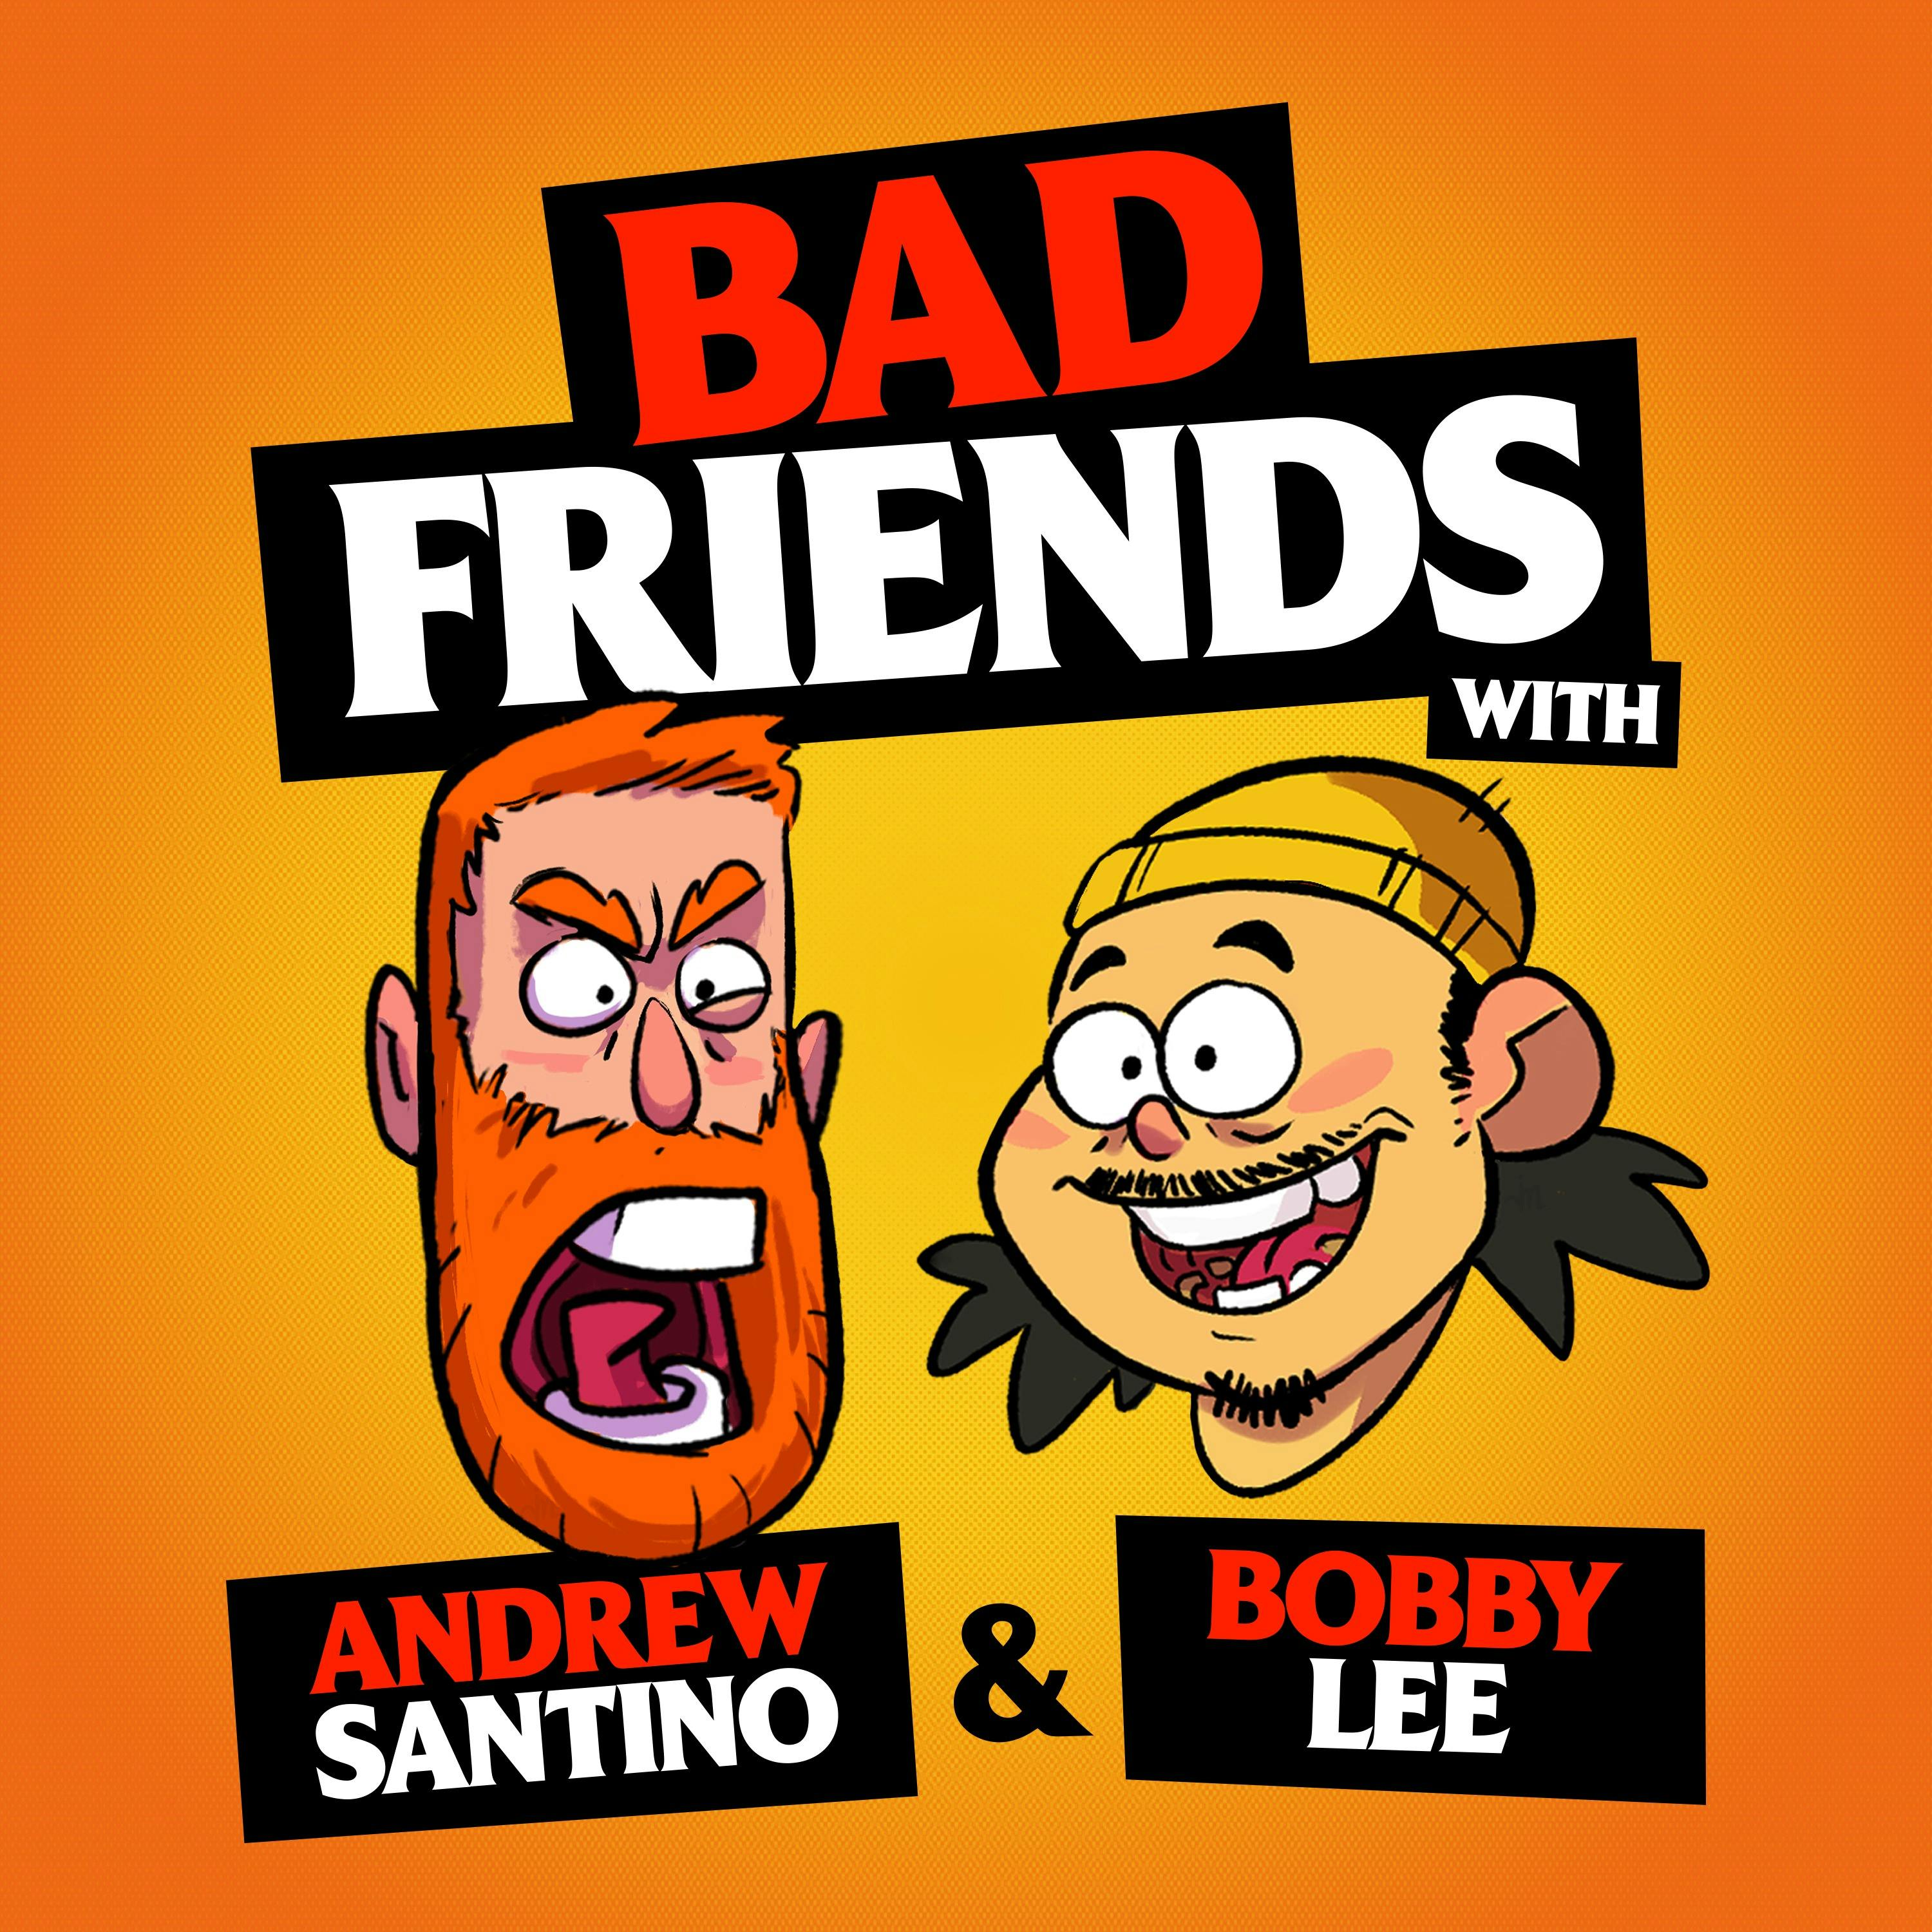 I Love Titanic and I Love to Bowl by Andrew Santino and Bobby Lee